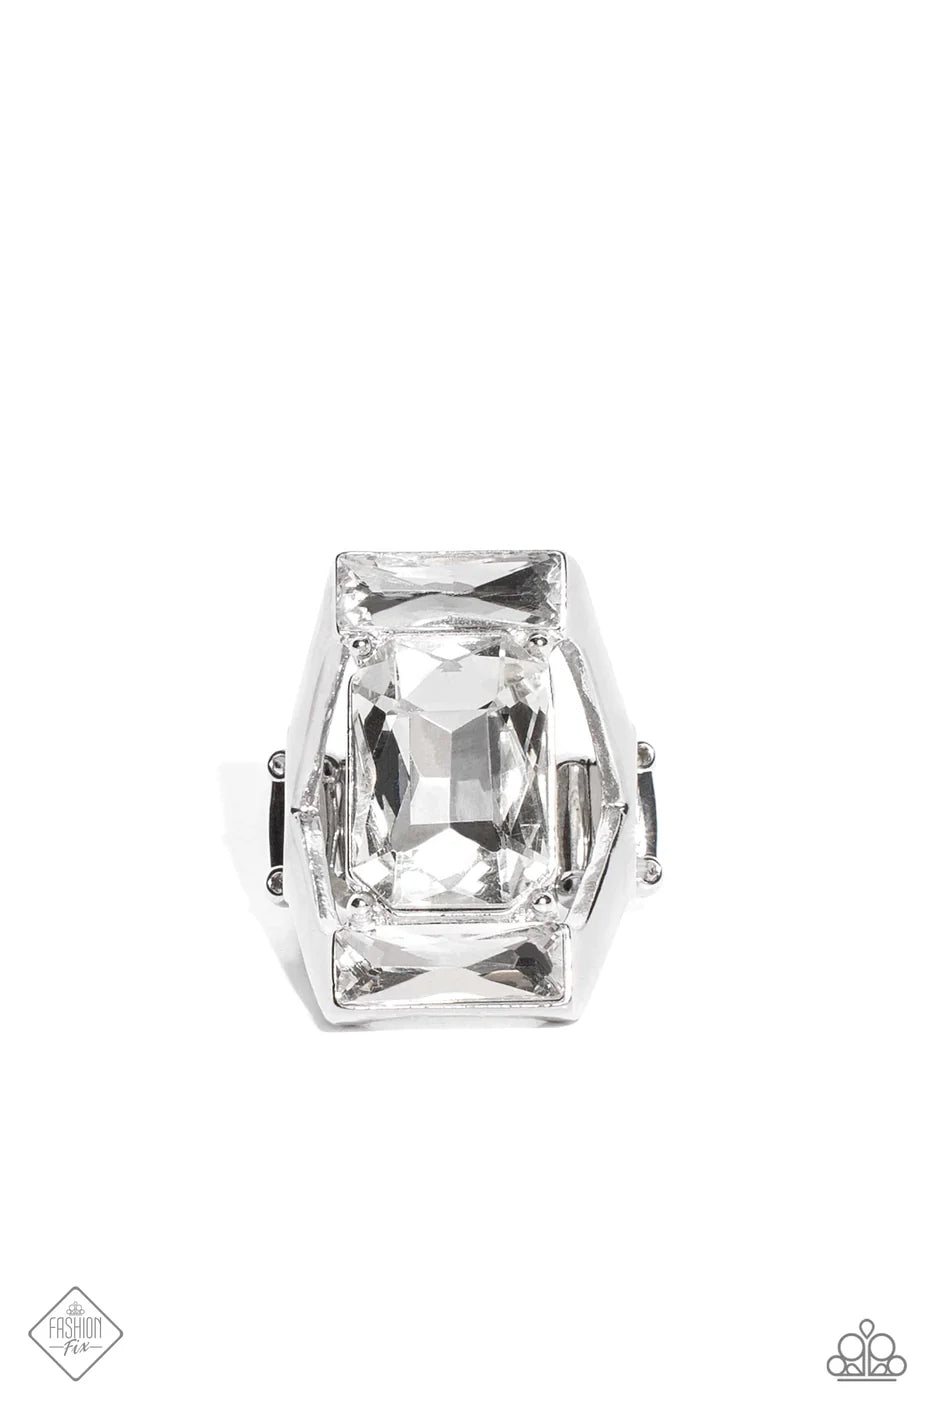 Right As CHAIN - White (Emerald-Cut Gems) Ring (MM-0323)